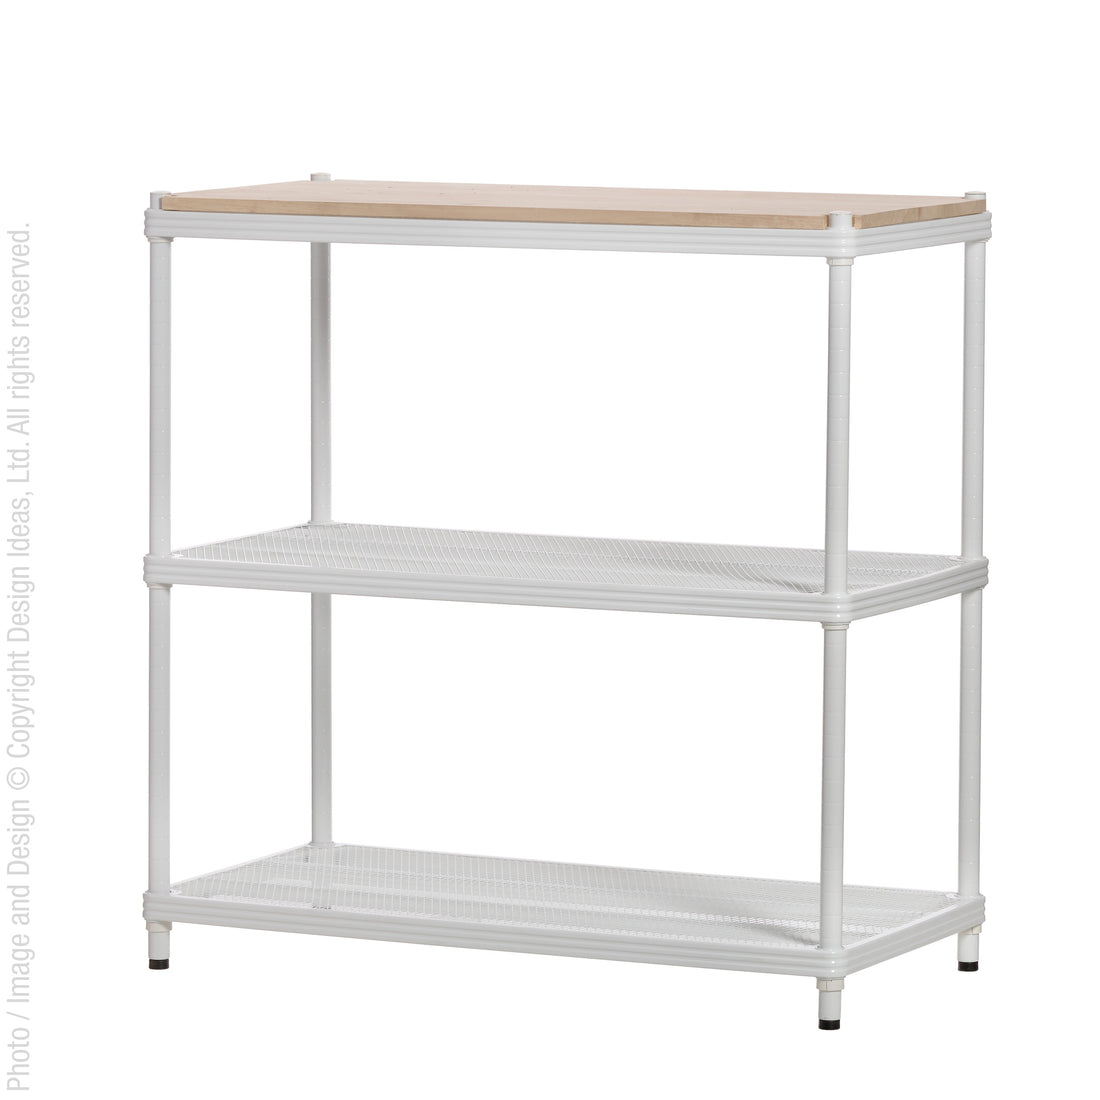 MeshWorks® workbench - White | Image 2 | Premium Shelving from the MeshWorks collection | made with Iron, Wood for long lasting use | Design Ideas